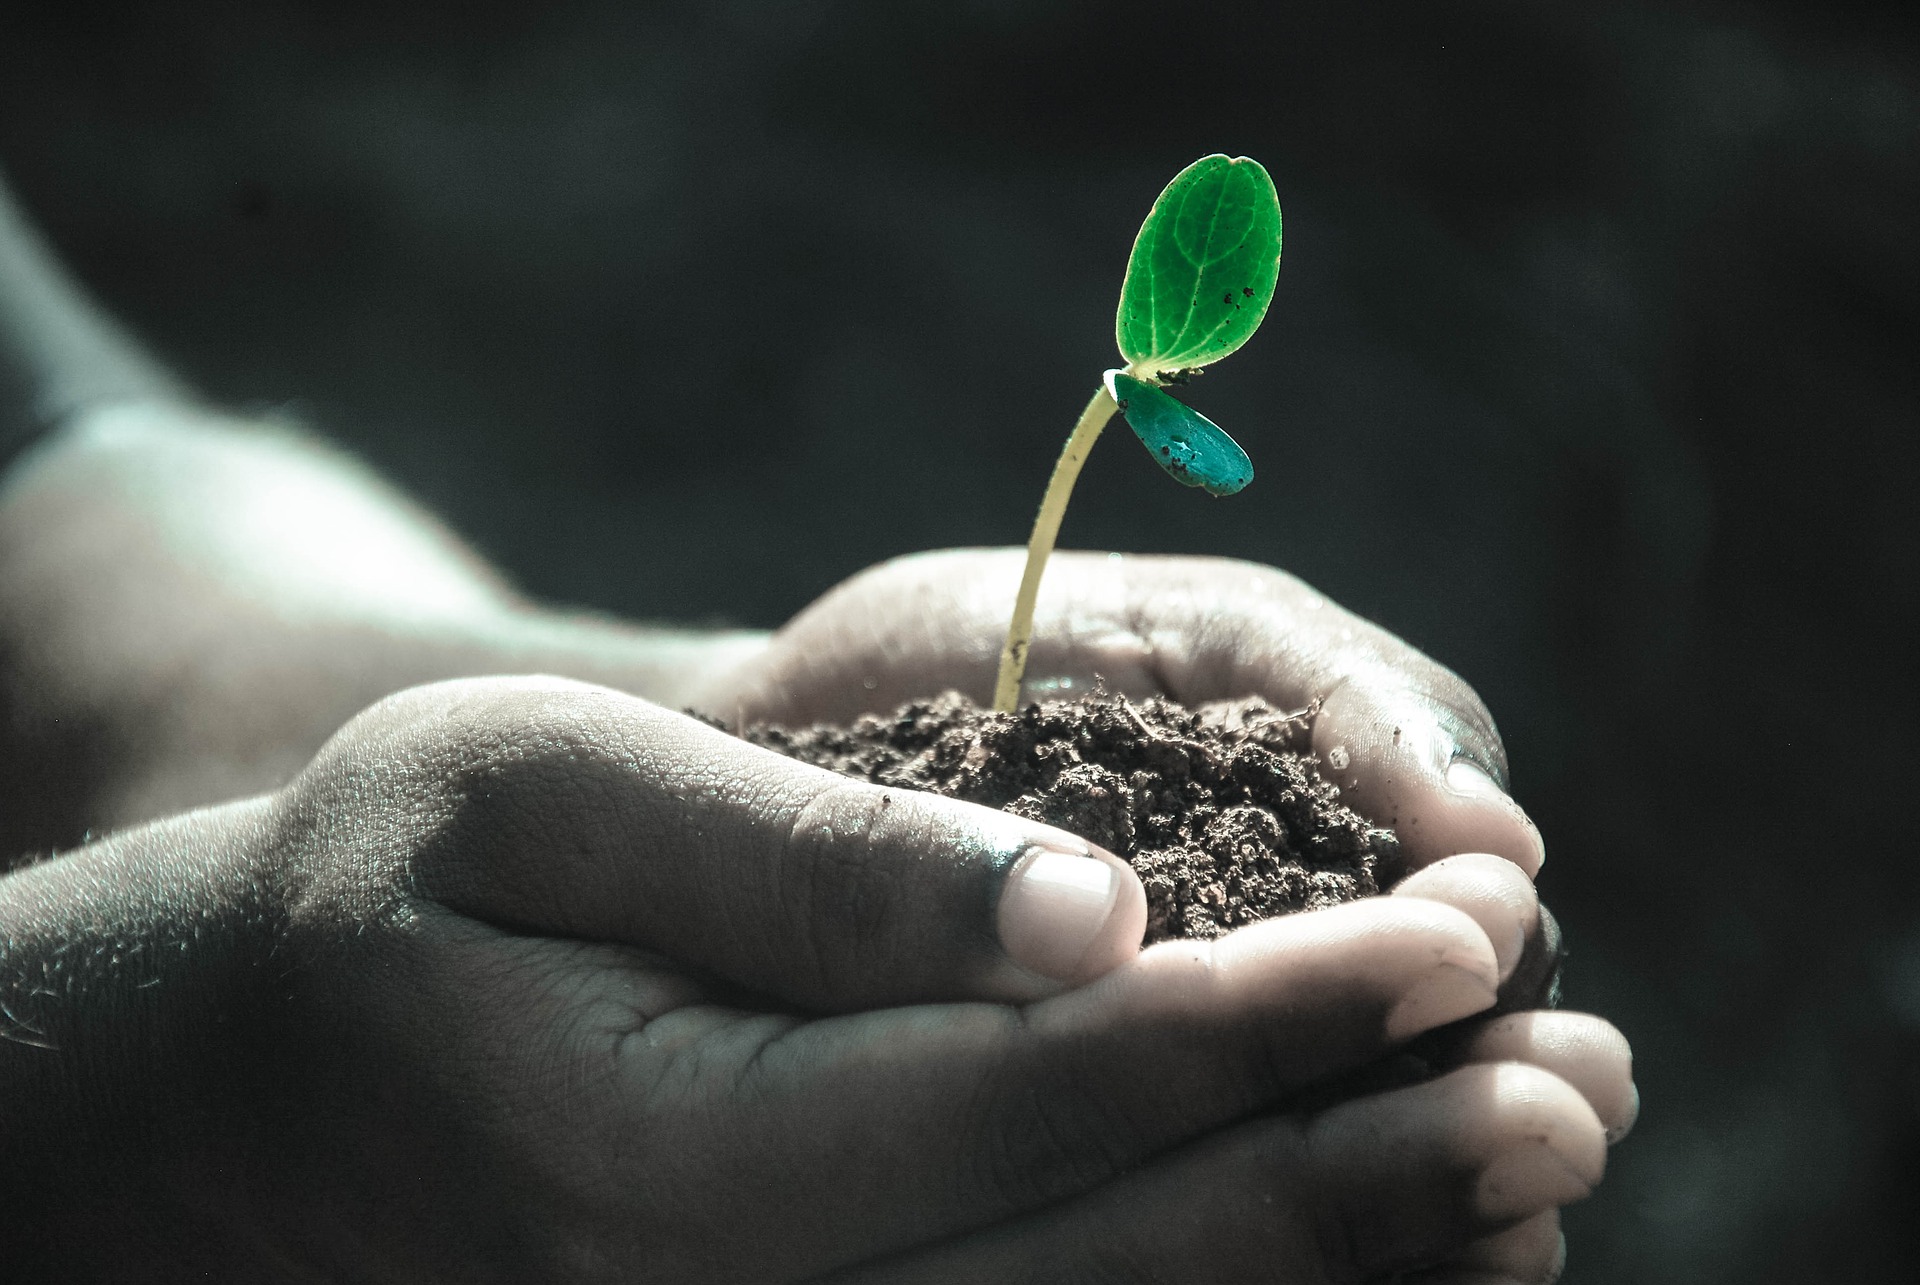 sowing hope for the planet